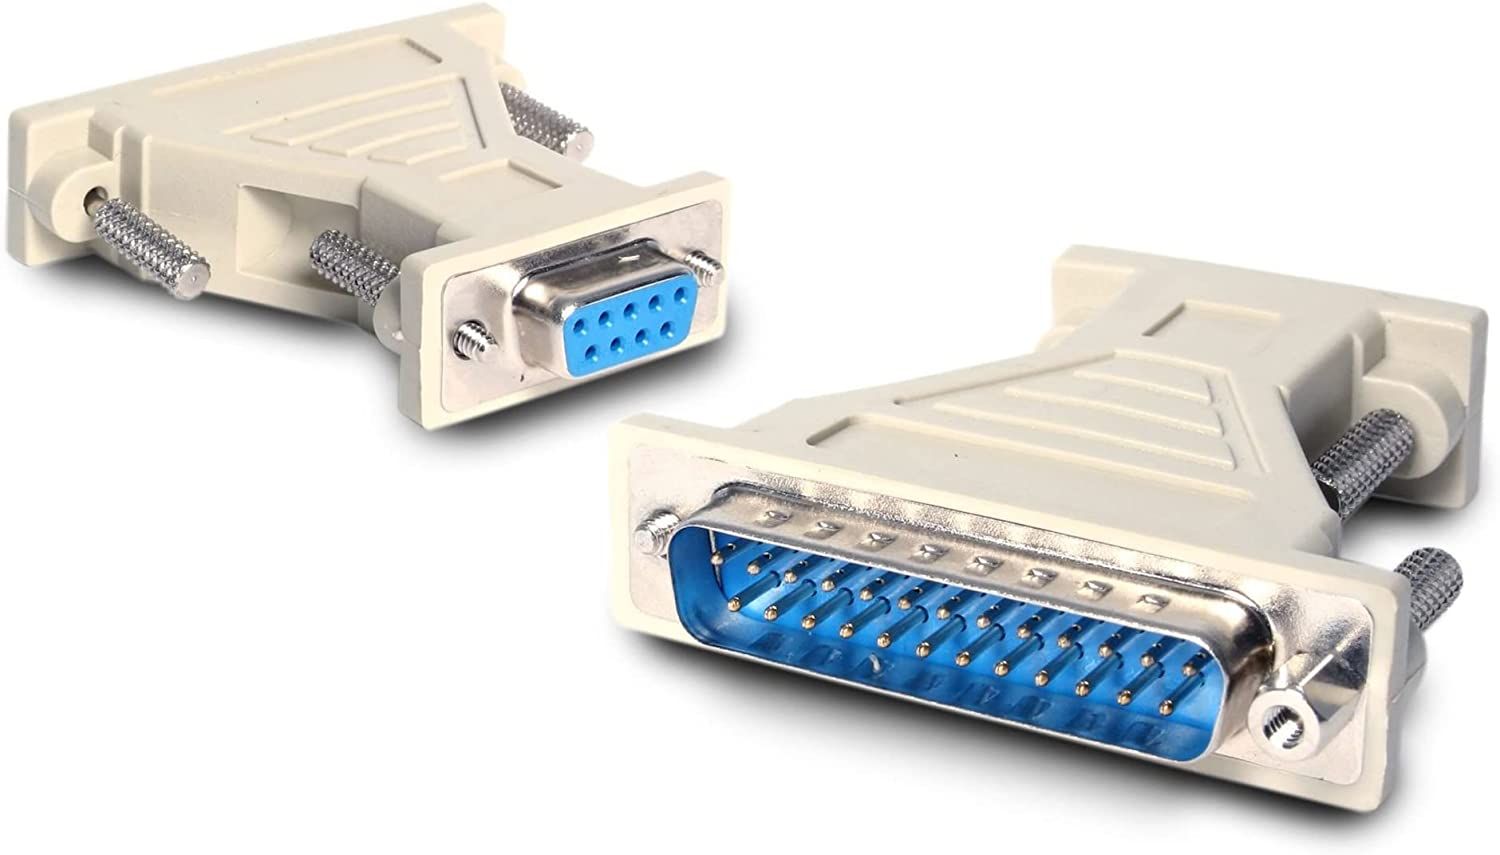 DB9 MALE TO DB25 MALE SERIAL ADAPTER